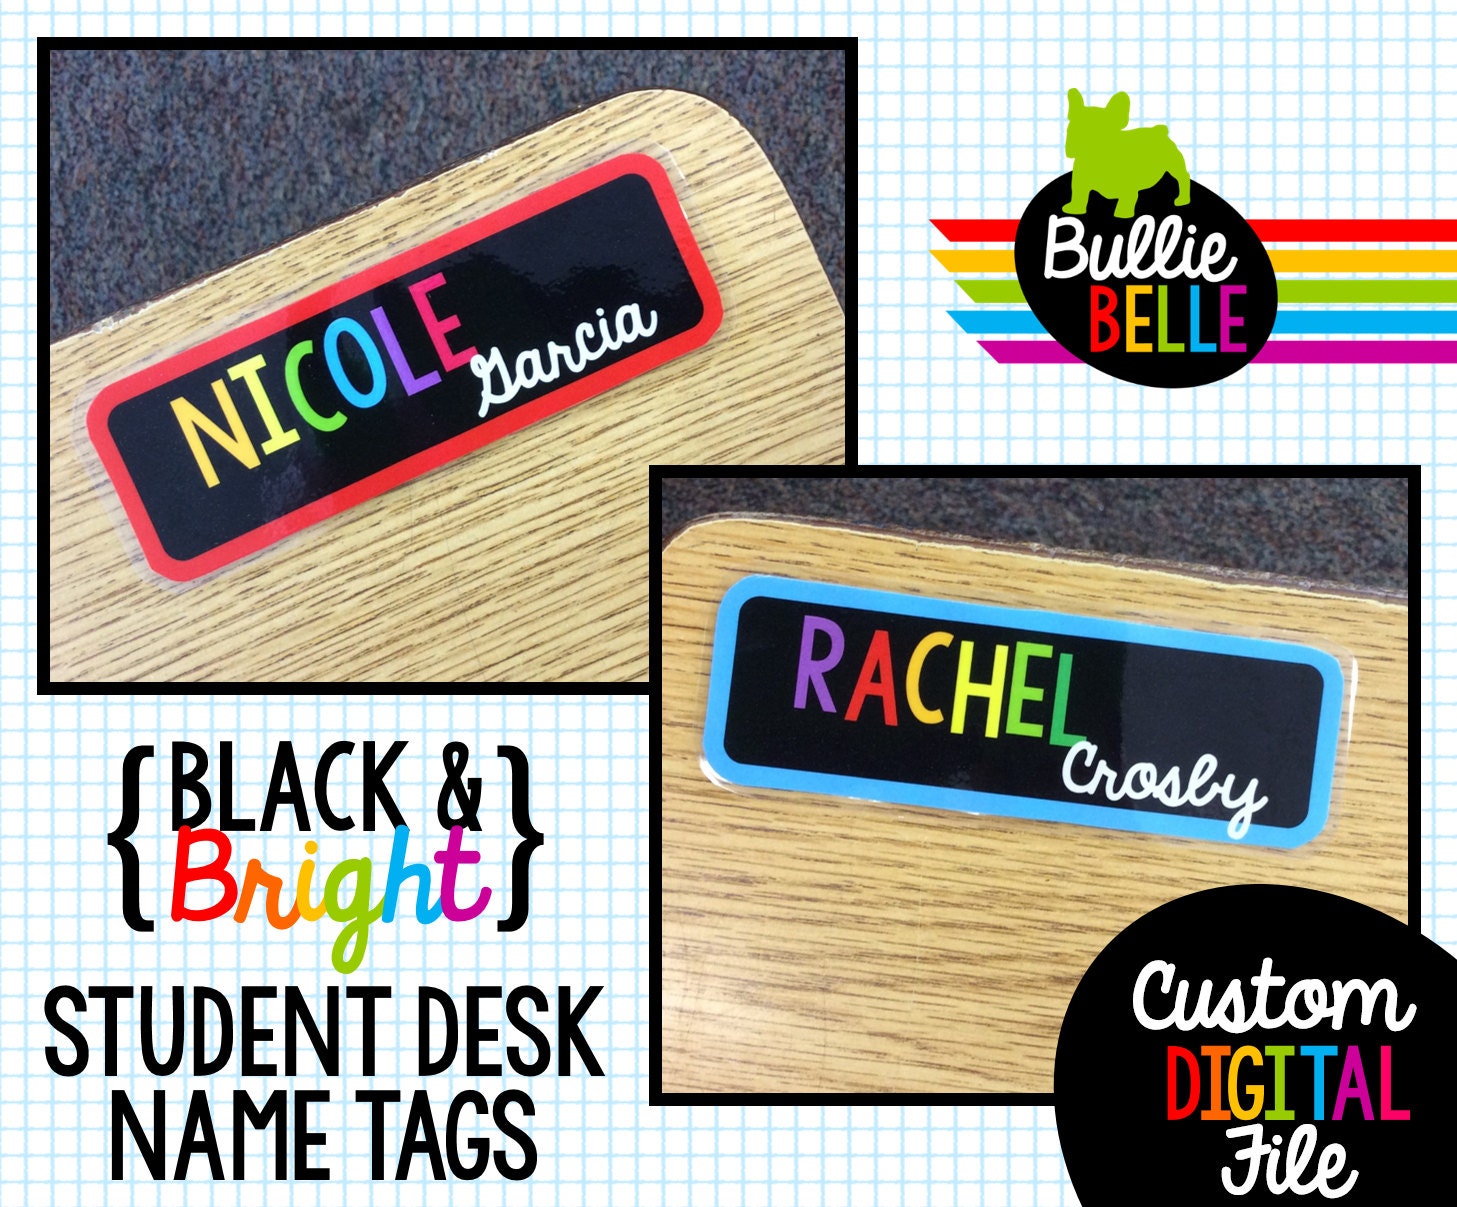 black bright student desk name tags student by bulliebelle